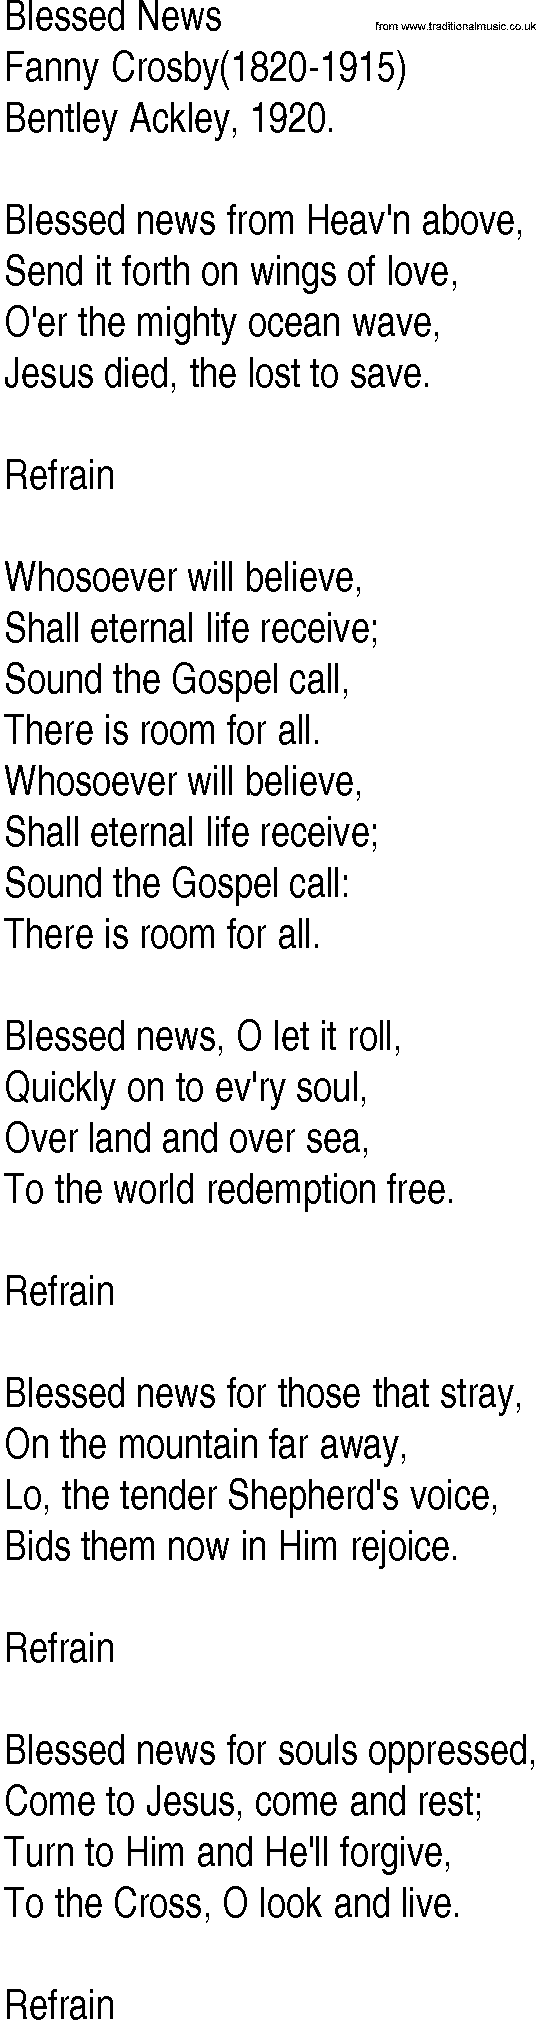 Hymn and Gospel Song: Blessed News by Fanny Crosby lyrics